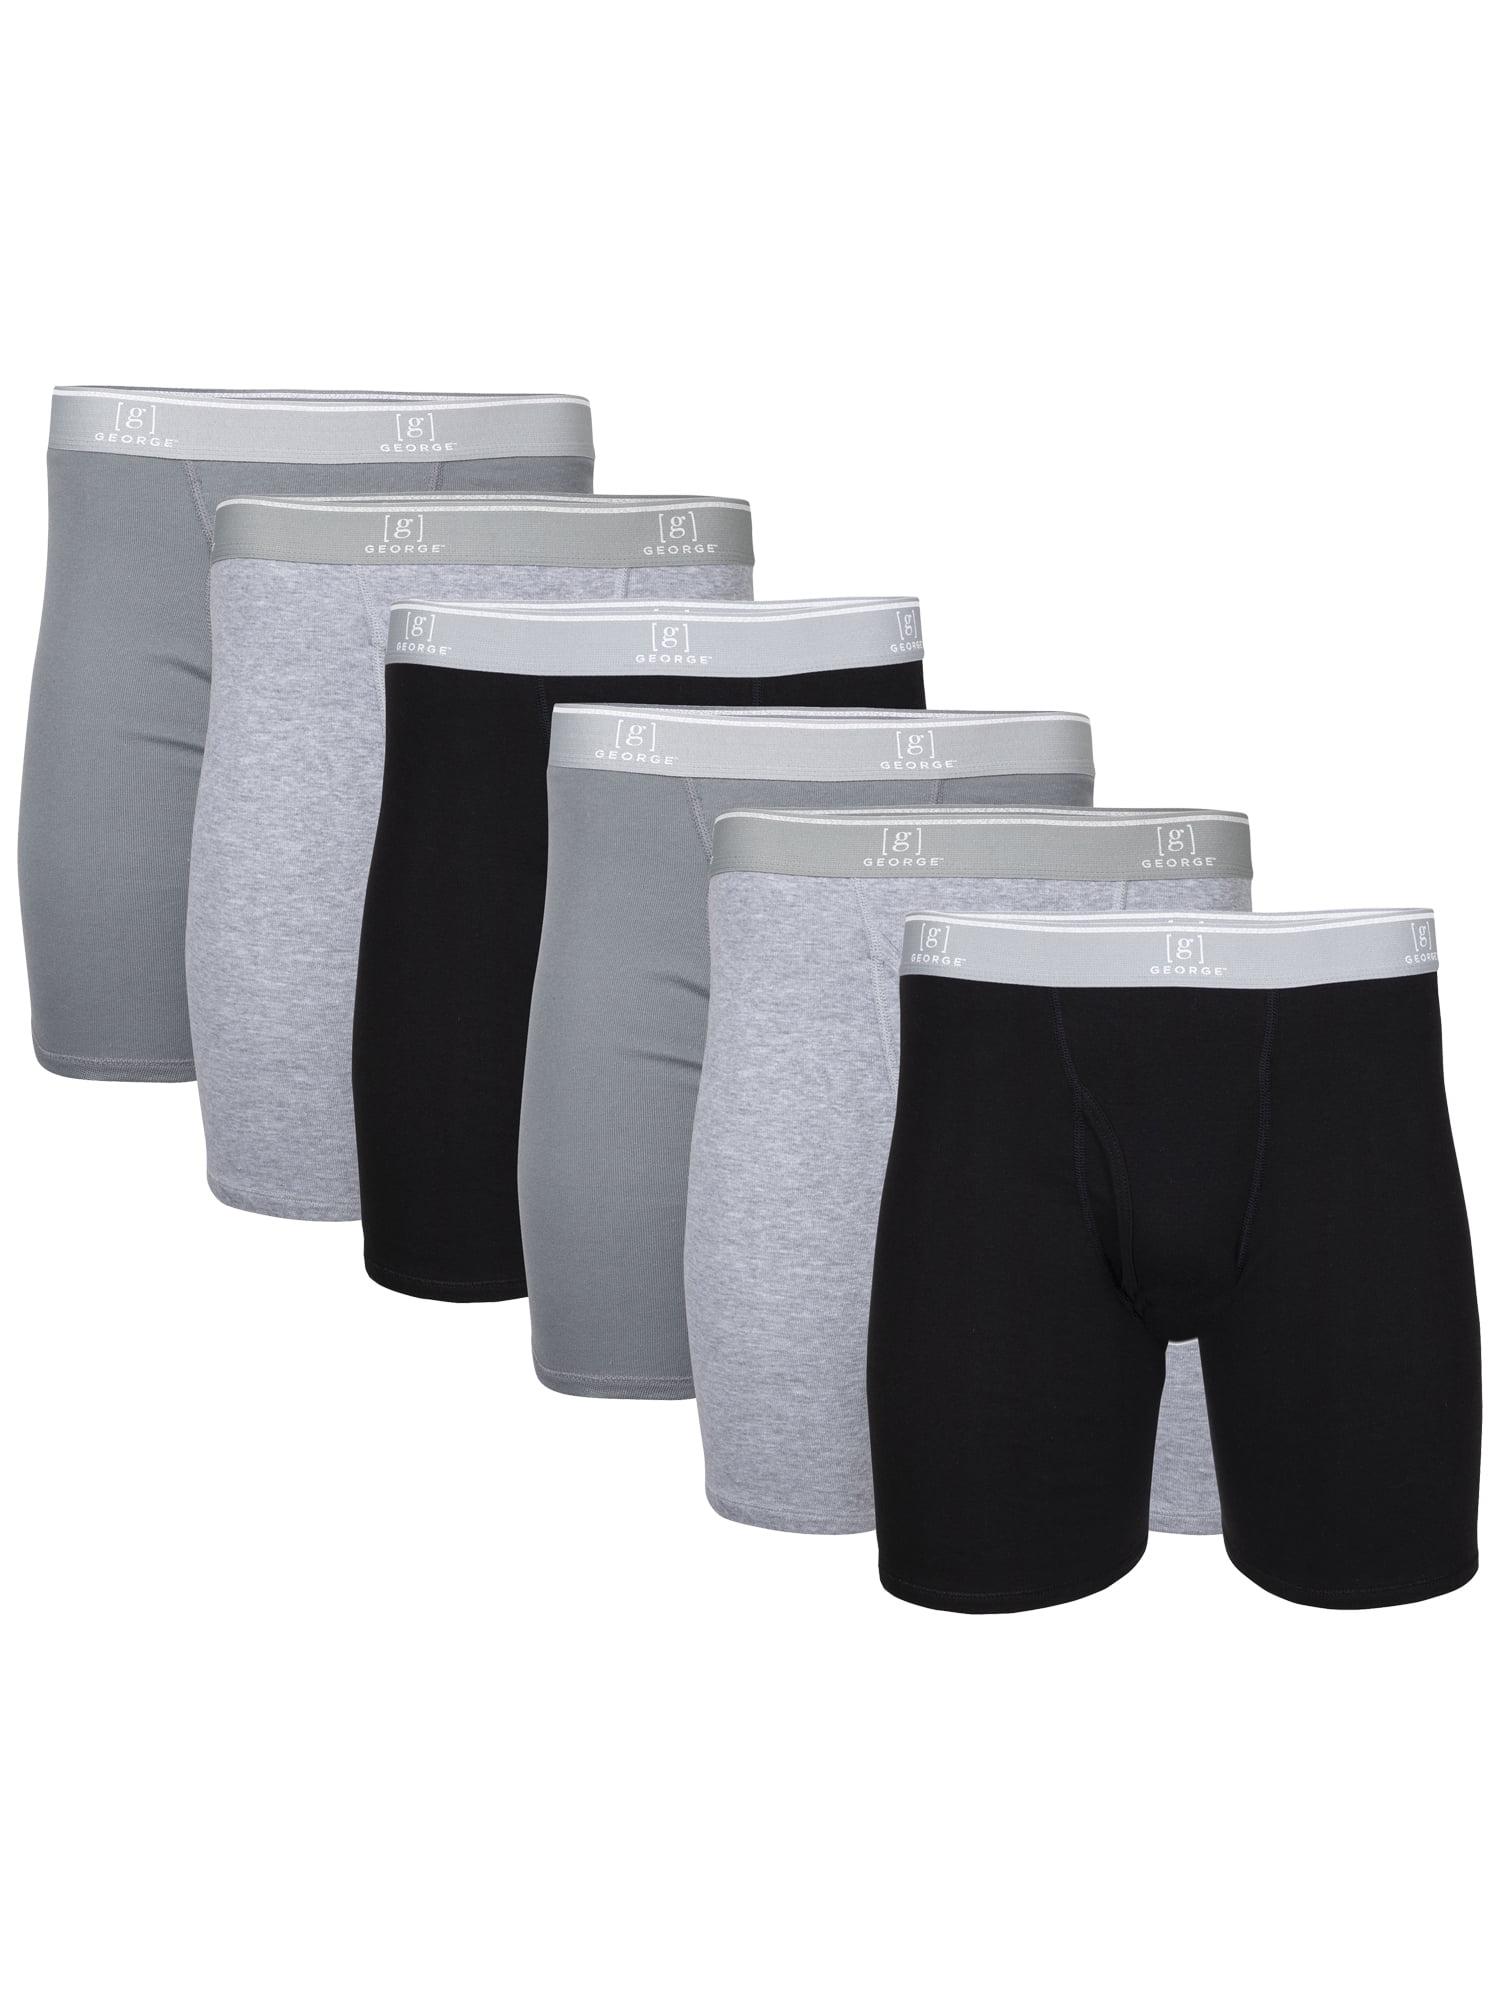 BOZGEER'S Men's Boxer Briefs Soft Cotton Open End Tagless Underwear 6-pack  and Waterproof carry bag